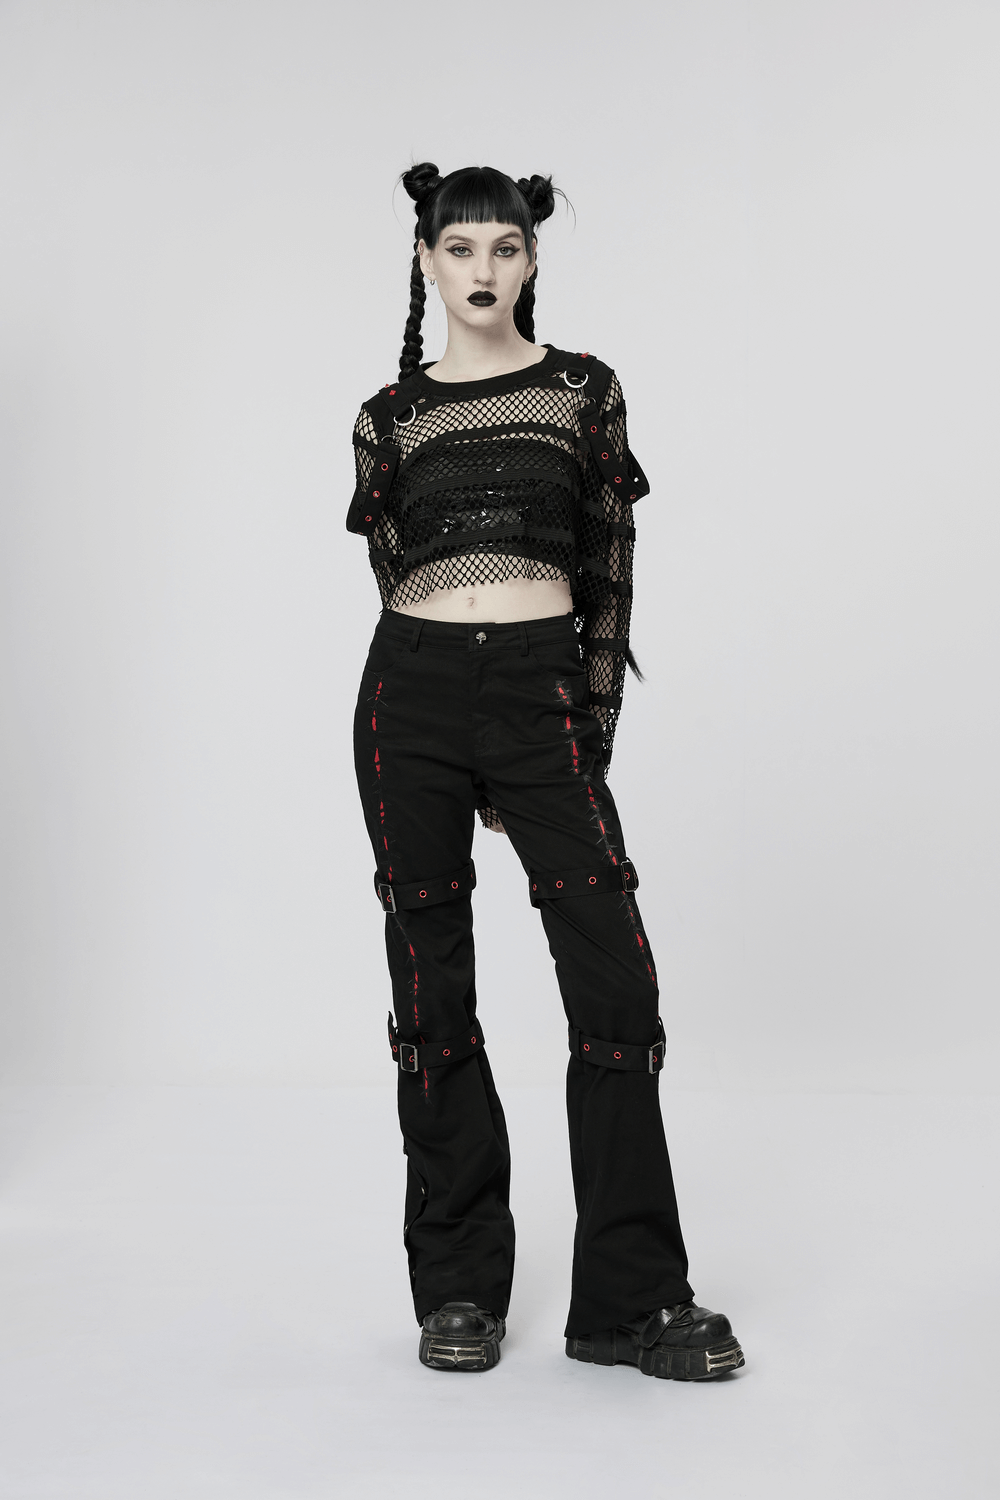 Strap-Detailed Embroidered Gothic Flare Pants - HARD'N'HEAVY